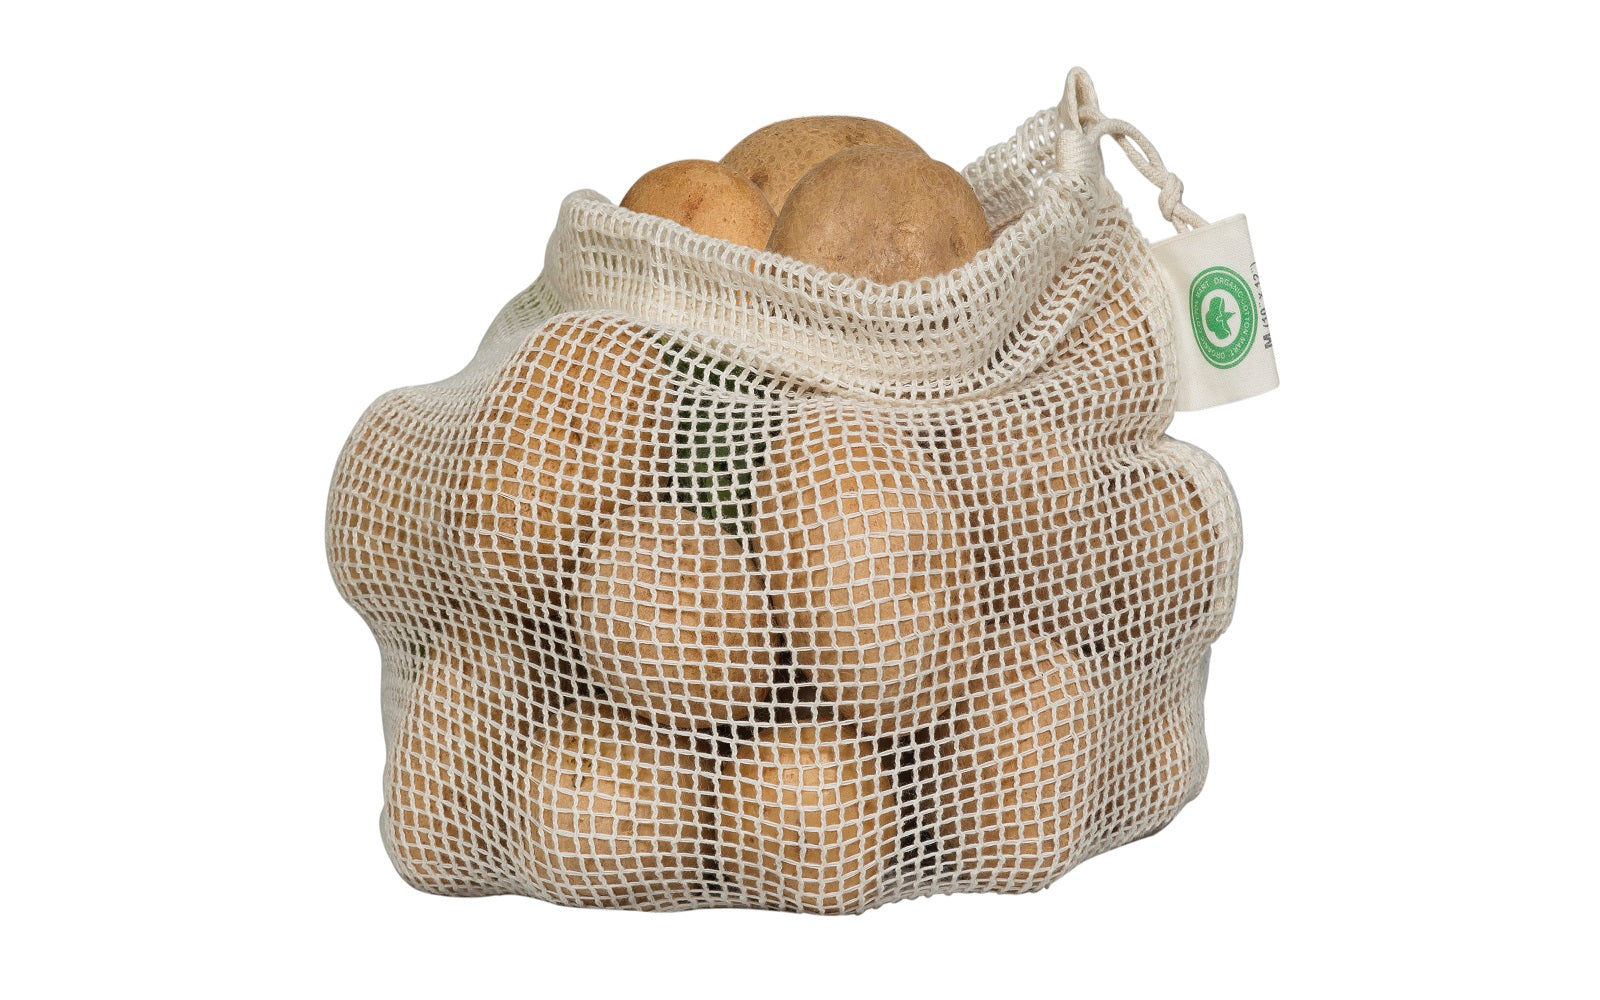 Cotton Mesh Produce Bags  Reusable Net Bags for Produce and Vegetables